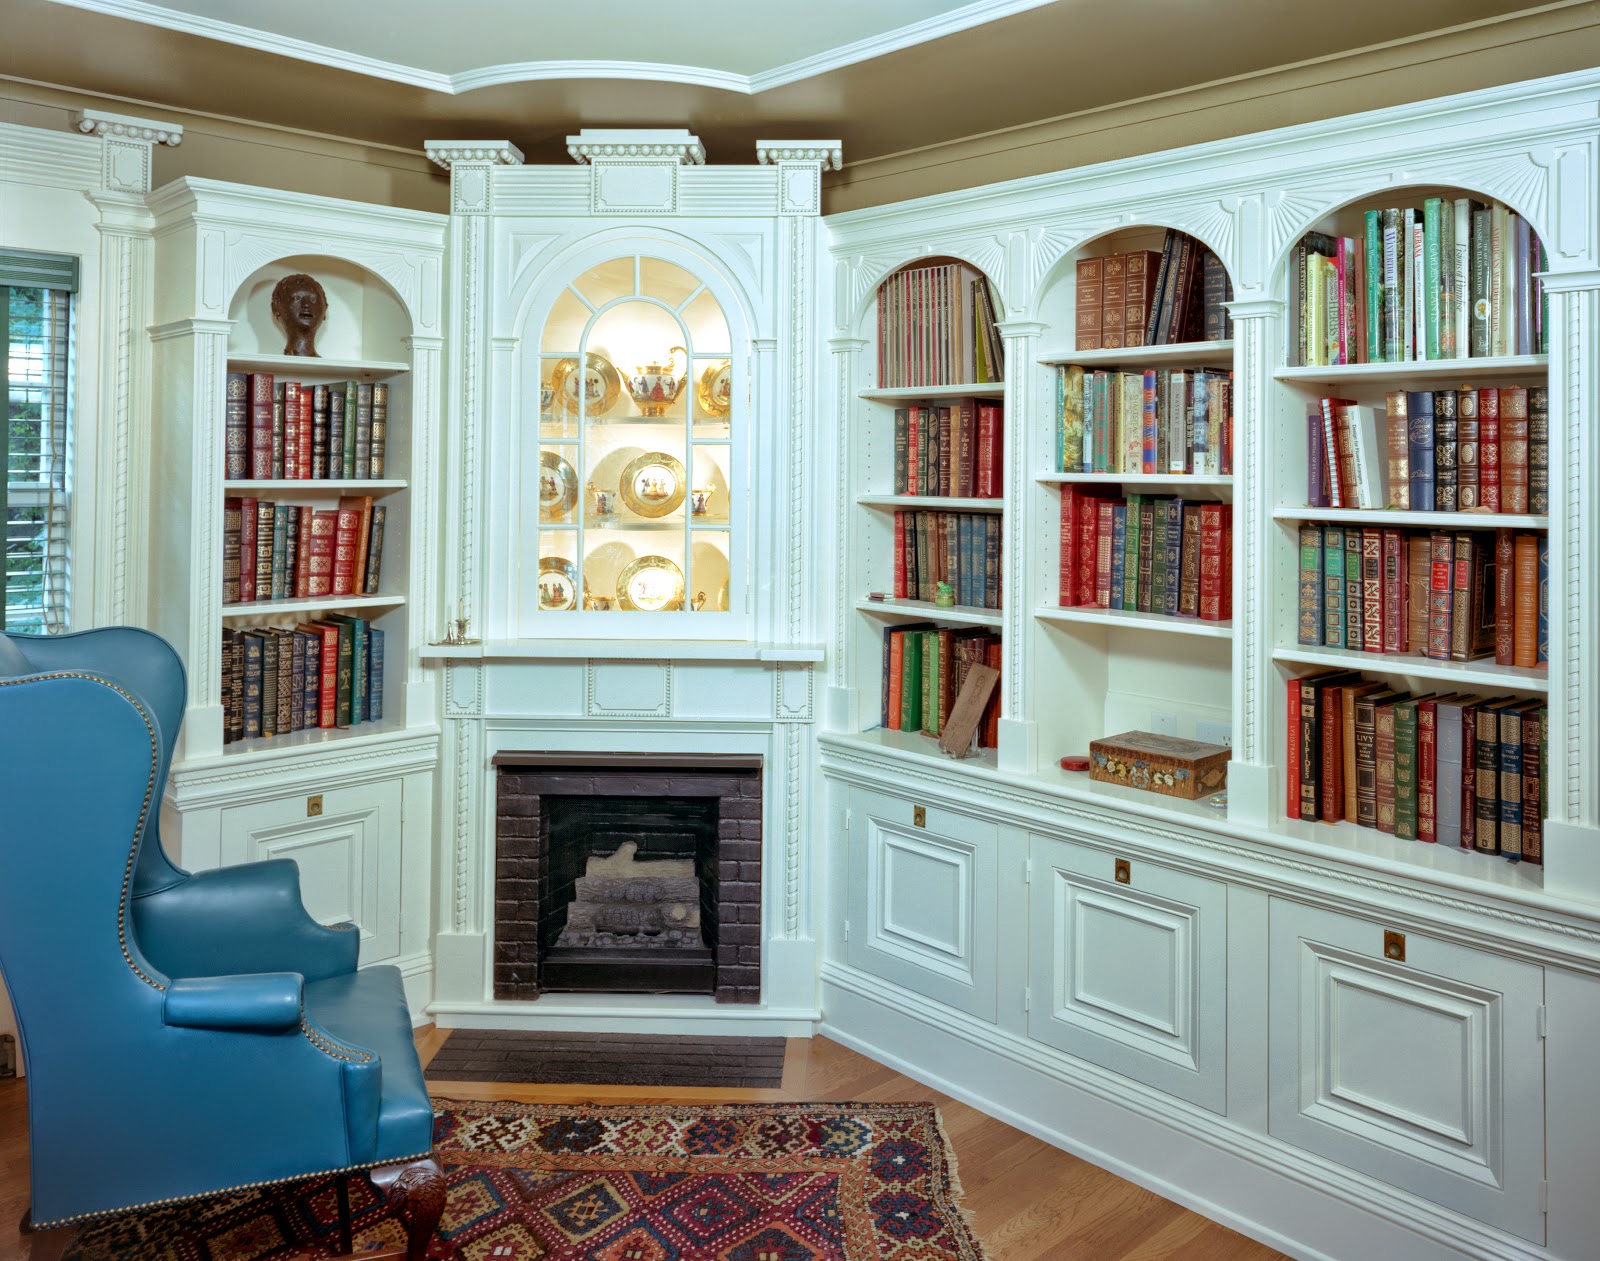 various decorative elements of the original library together with the requirements of a modern home